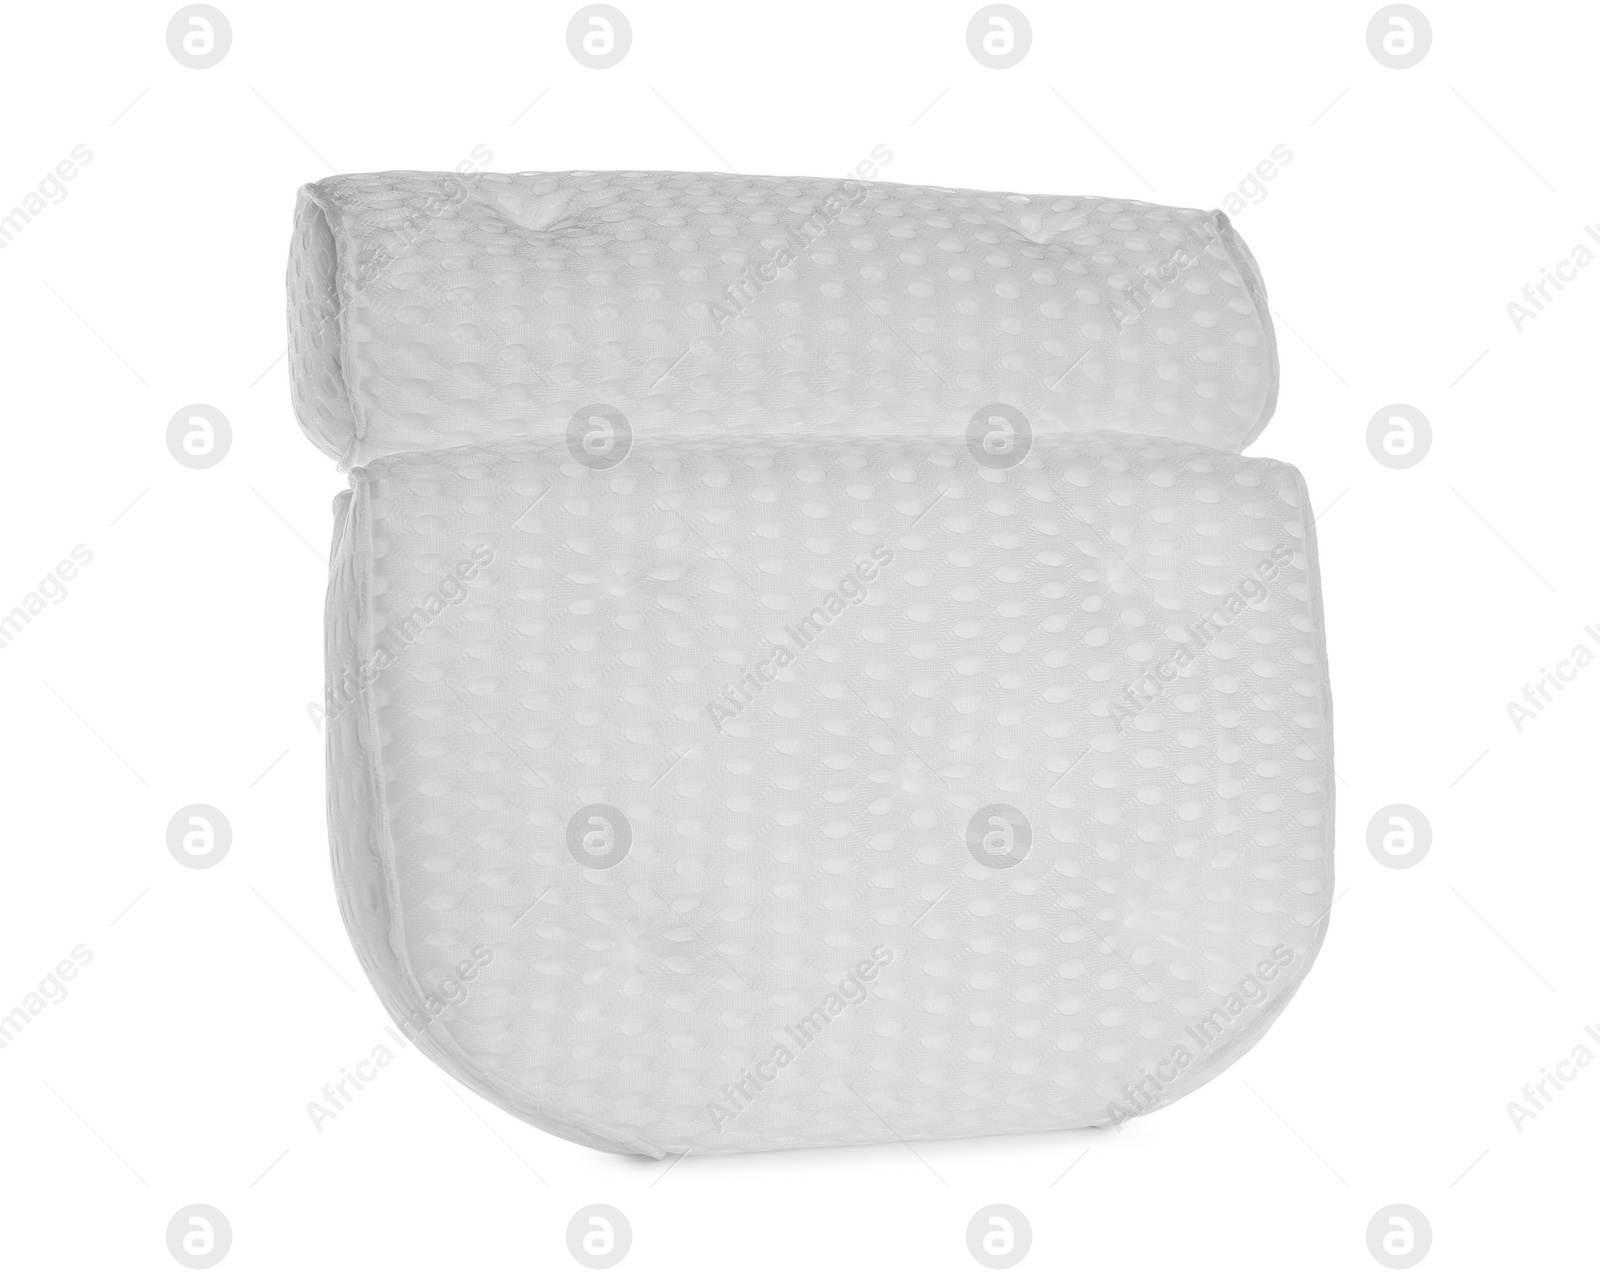 Photo of New soft bath pillow isolated on white